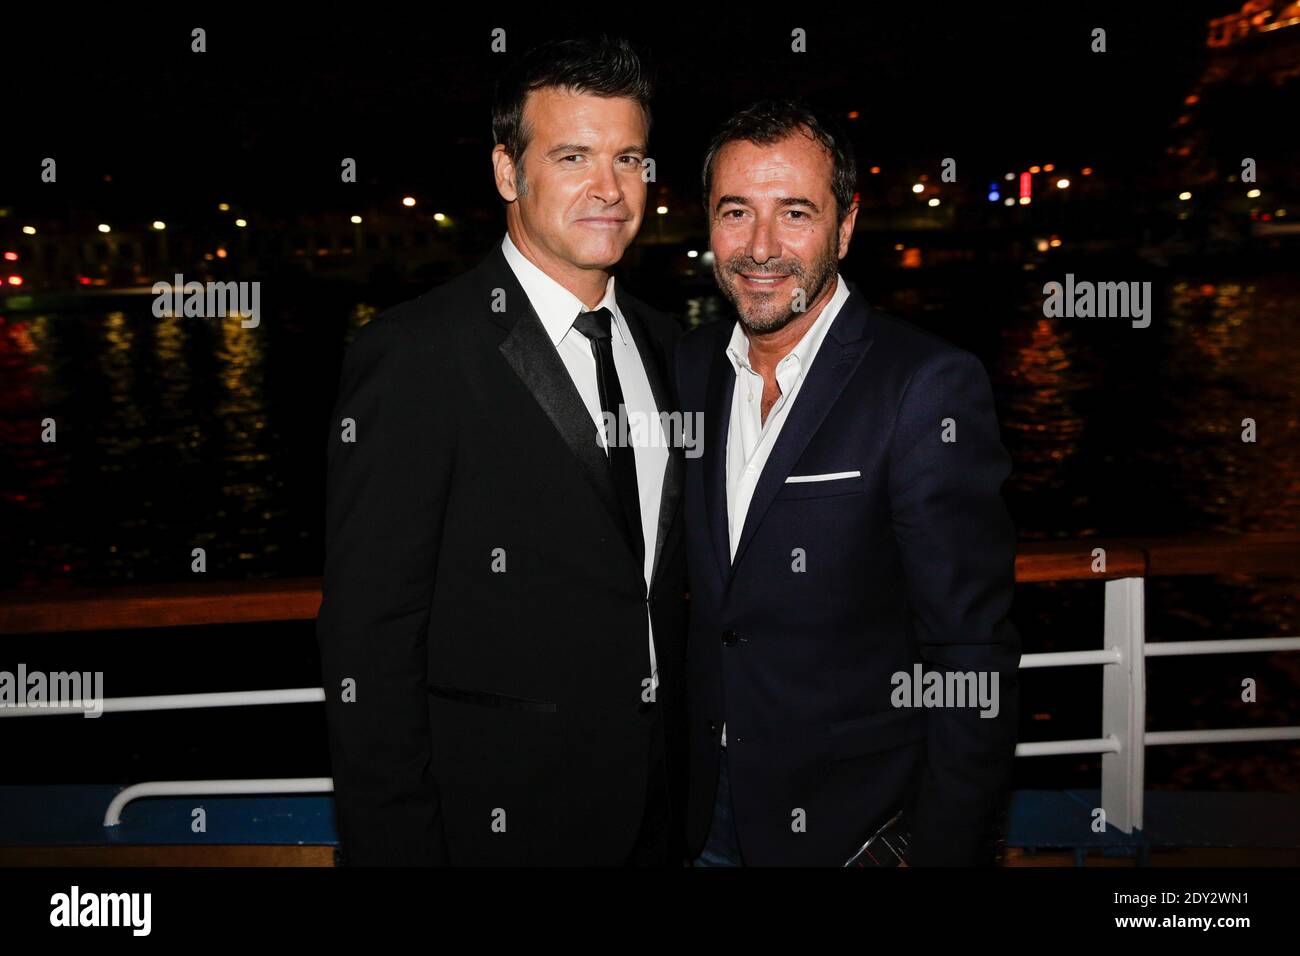 Roch Voisine and Bernard Montiel attending Forever Gentlemen 2 party to celebrate new album, in Paris, France on October 1, 2014. Photo by Jerome Domine/ABACAPRESS.COM Stock Photo